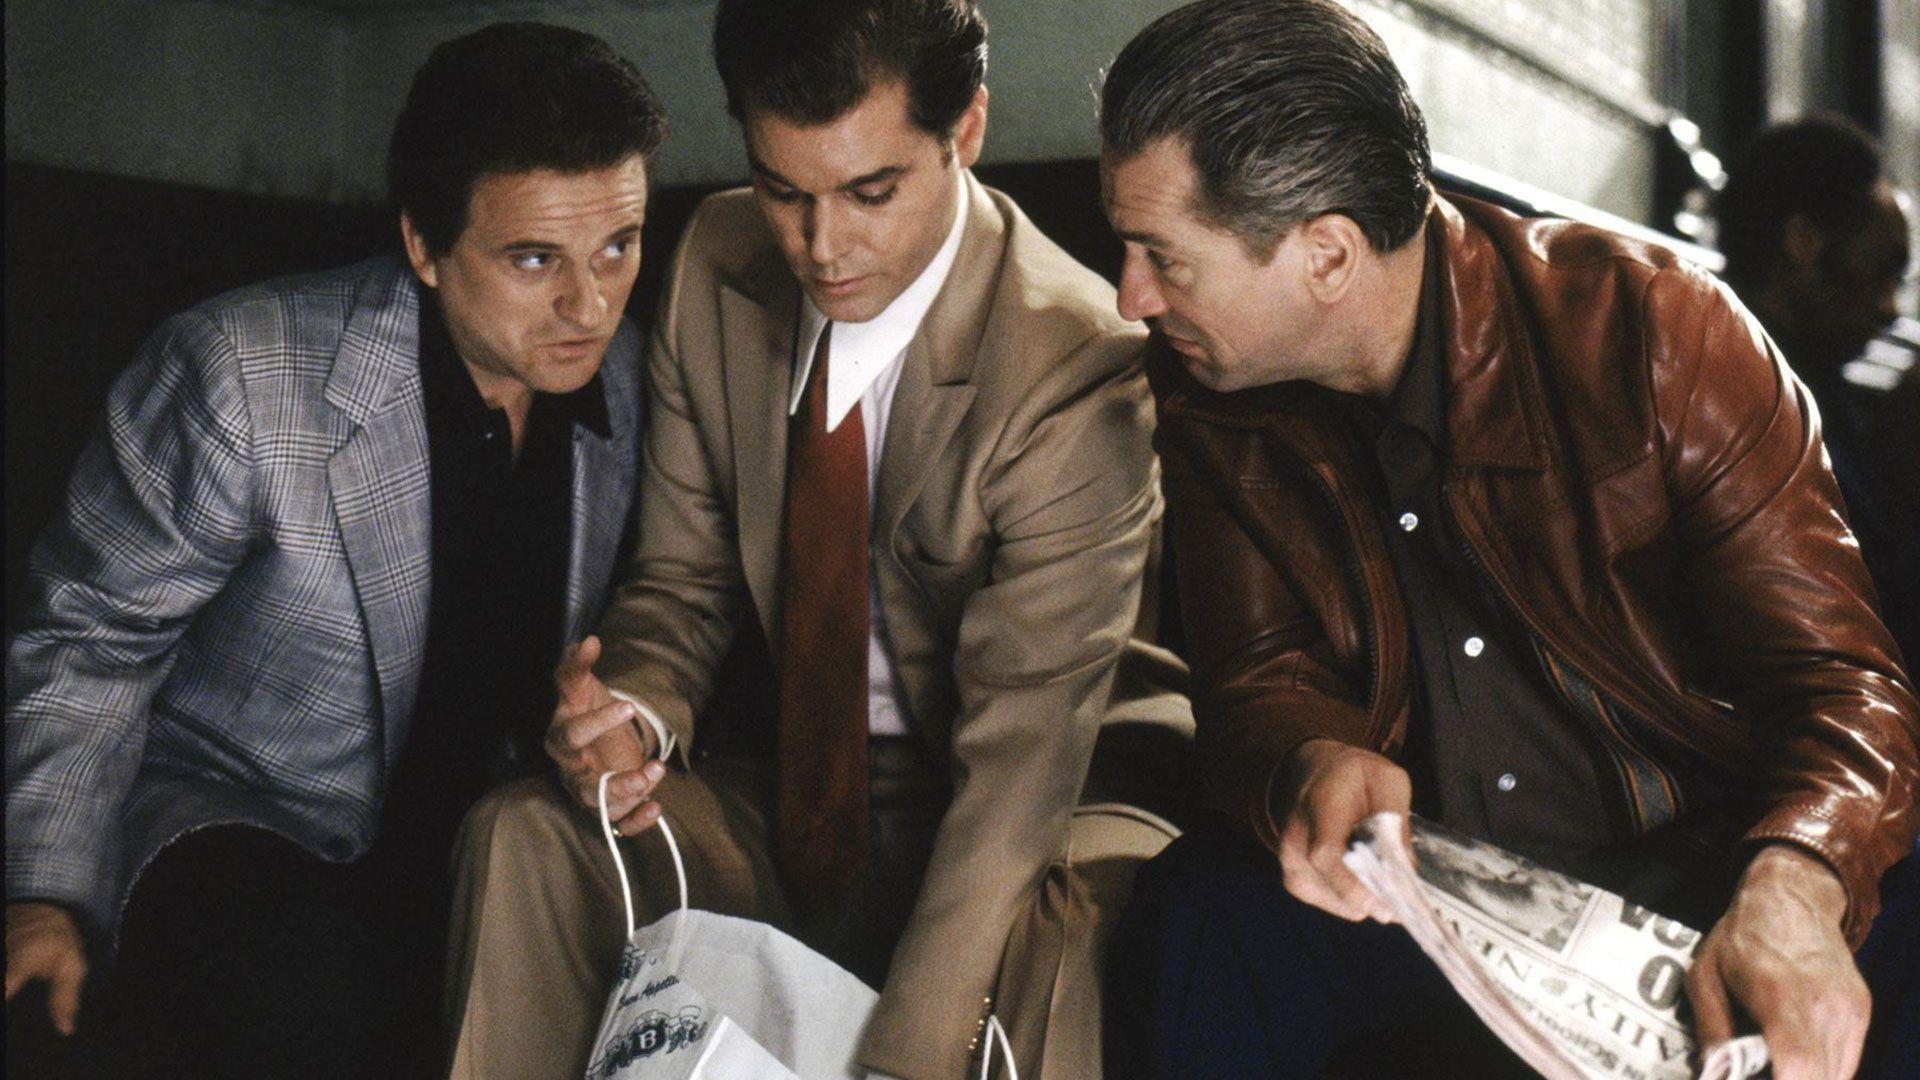 Goodfellas (1990) Movie in HD and Wallpaper